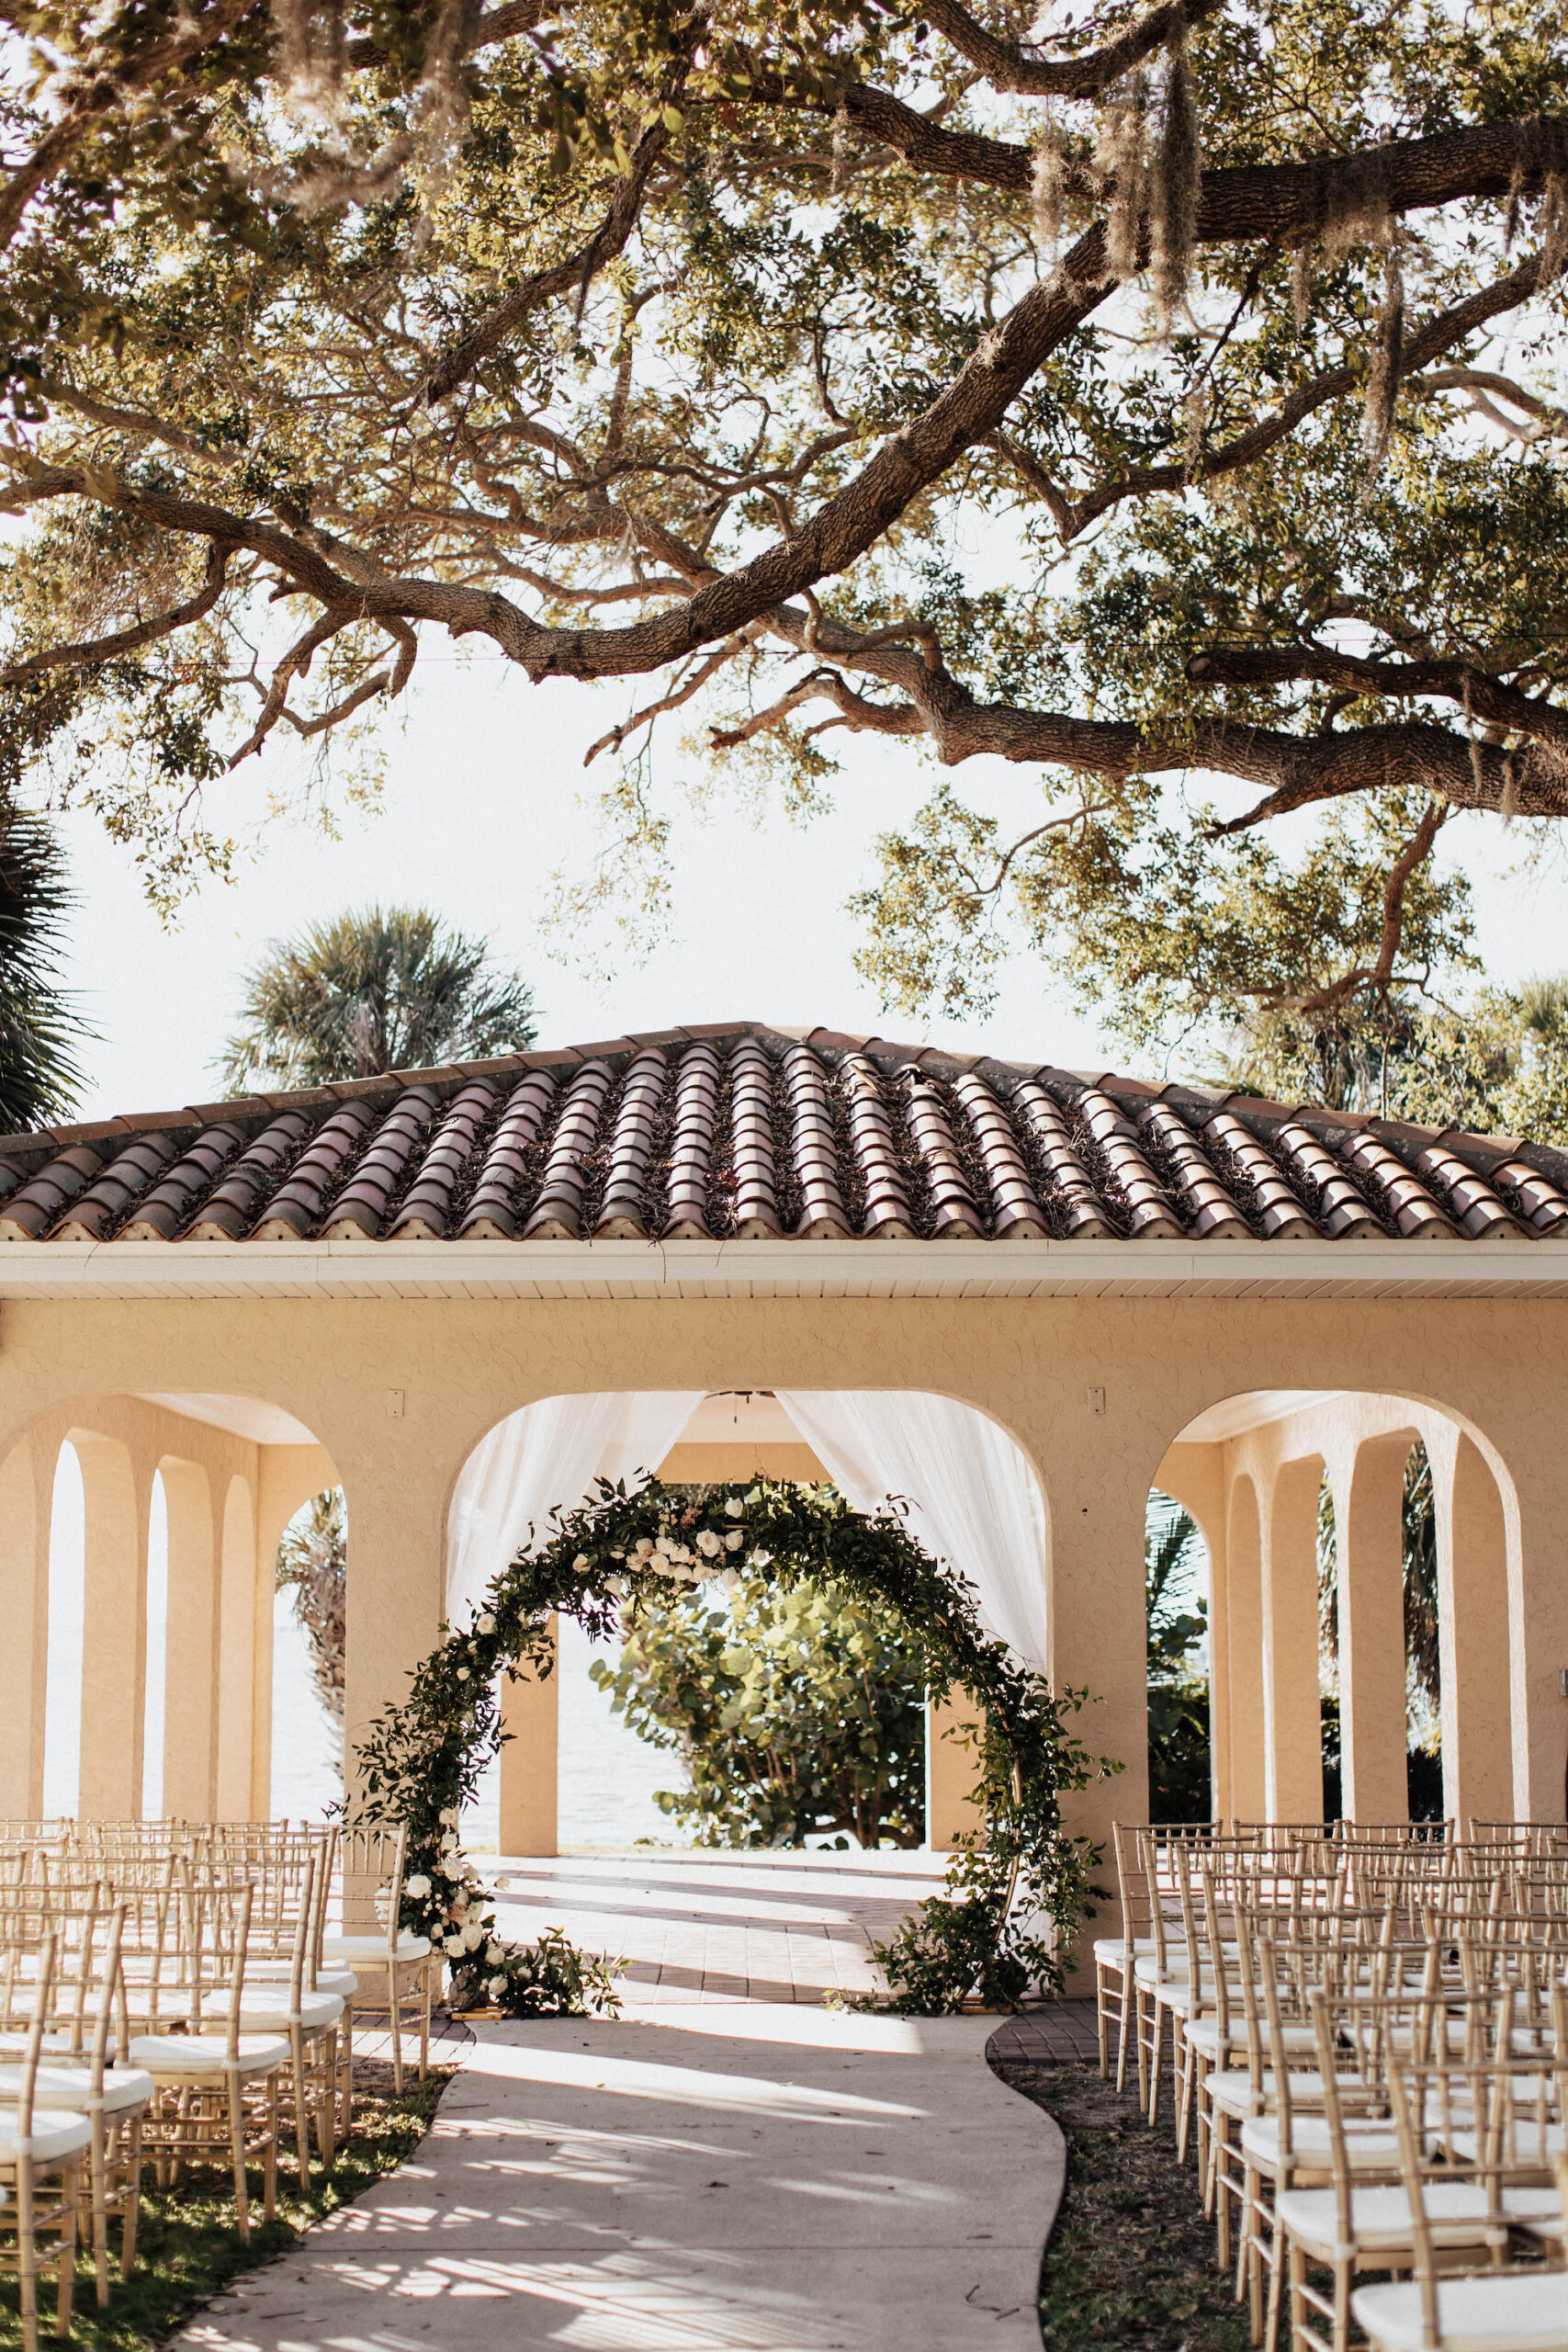 Classic Elegant Outdoor Wedding Ceremony with Circle Arch with Greenery Details